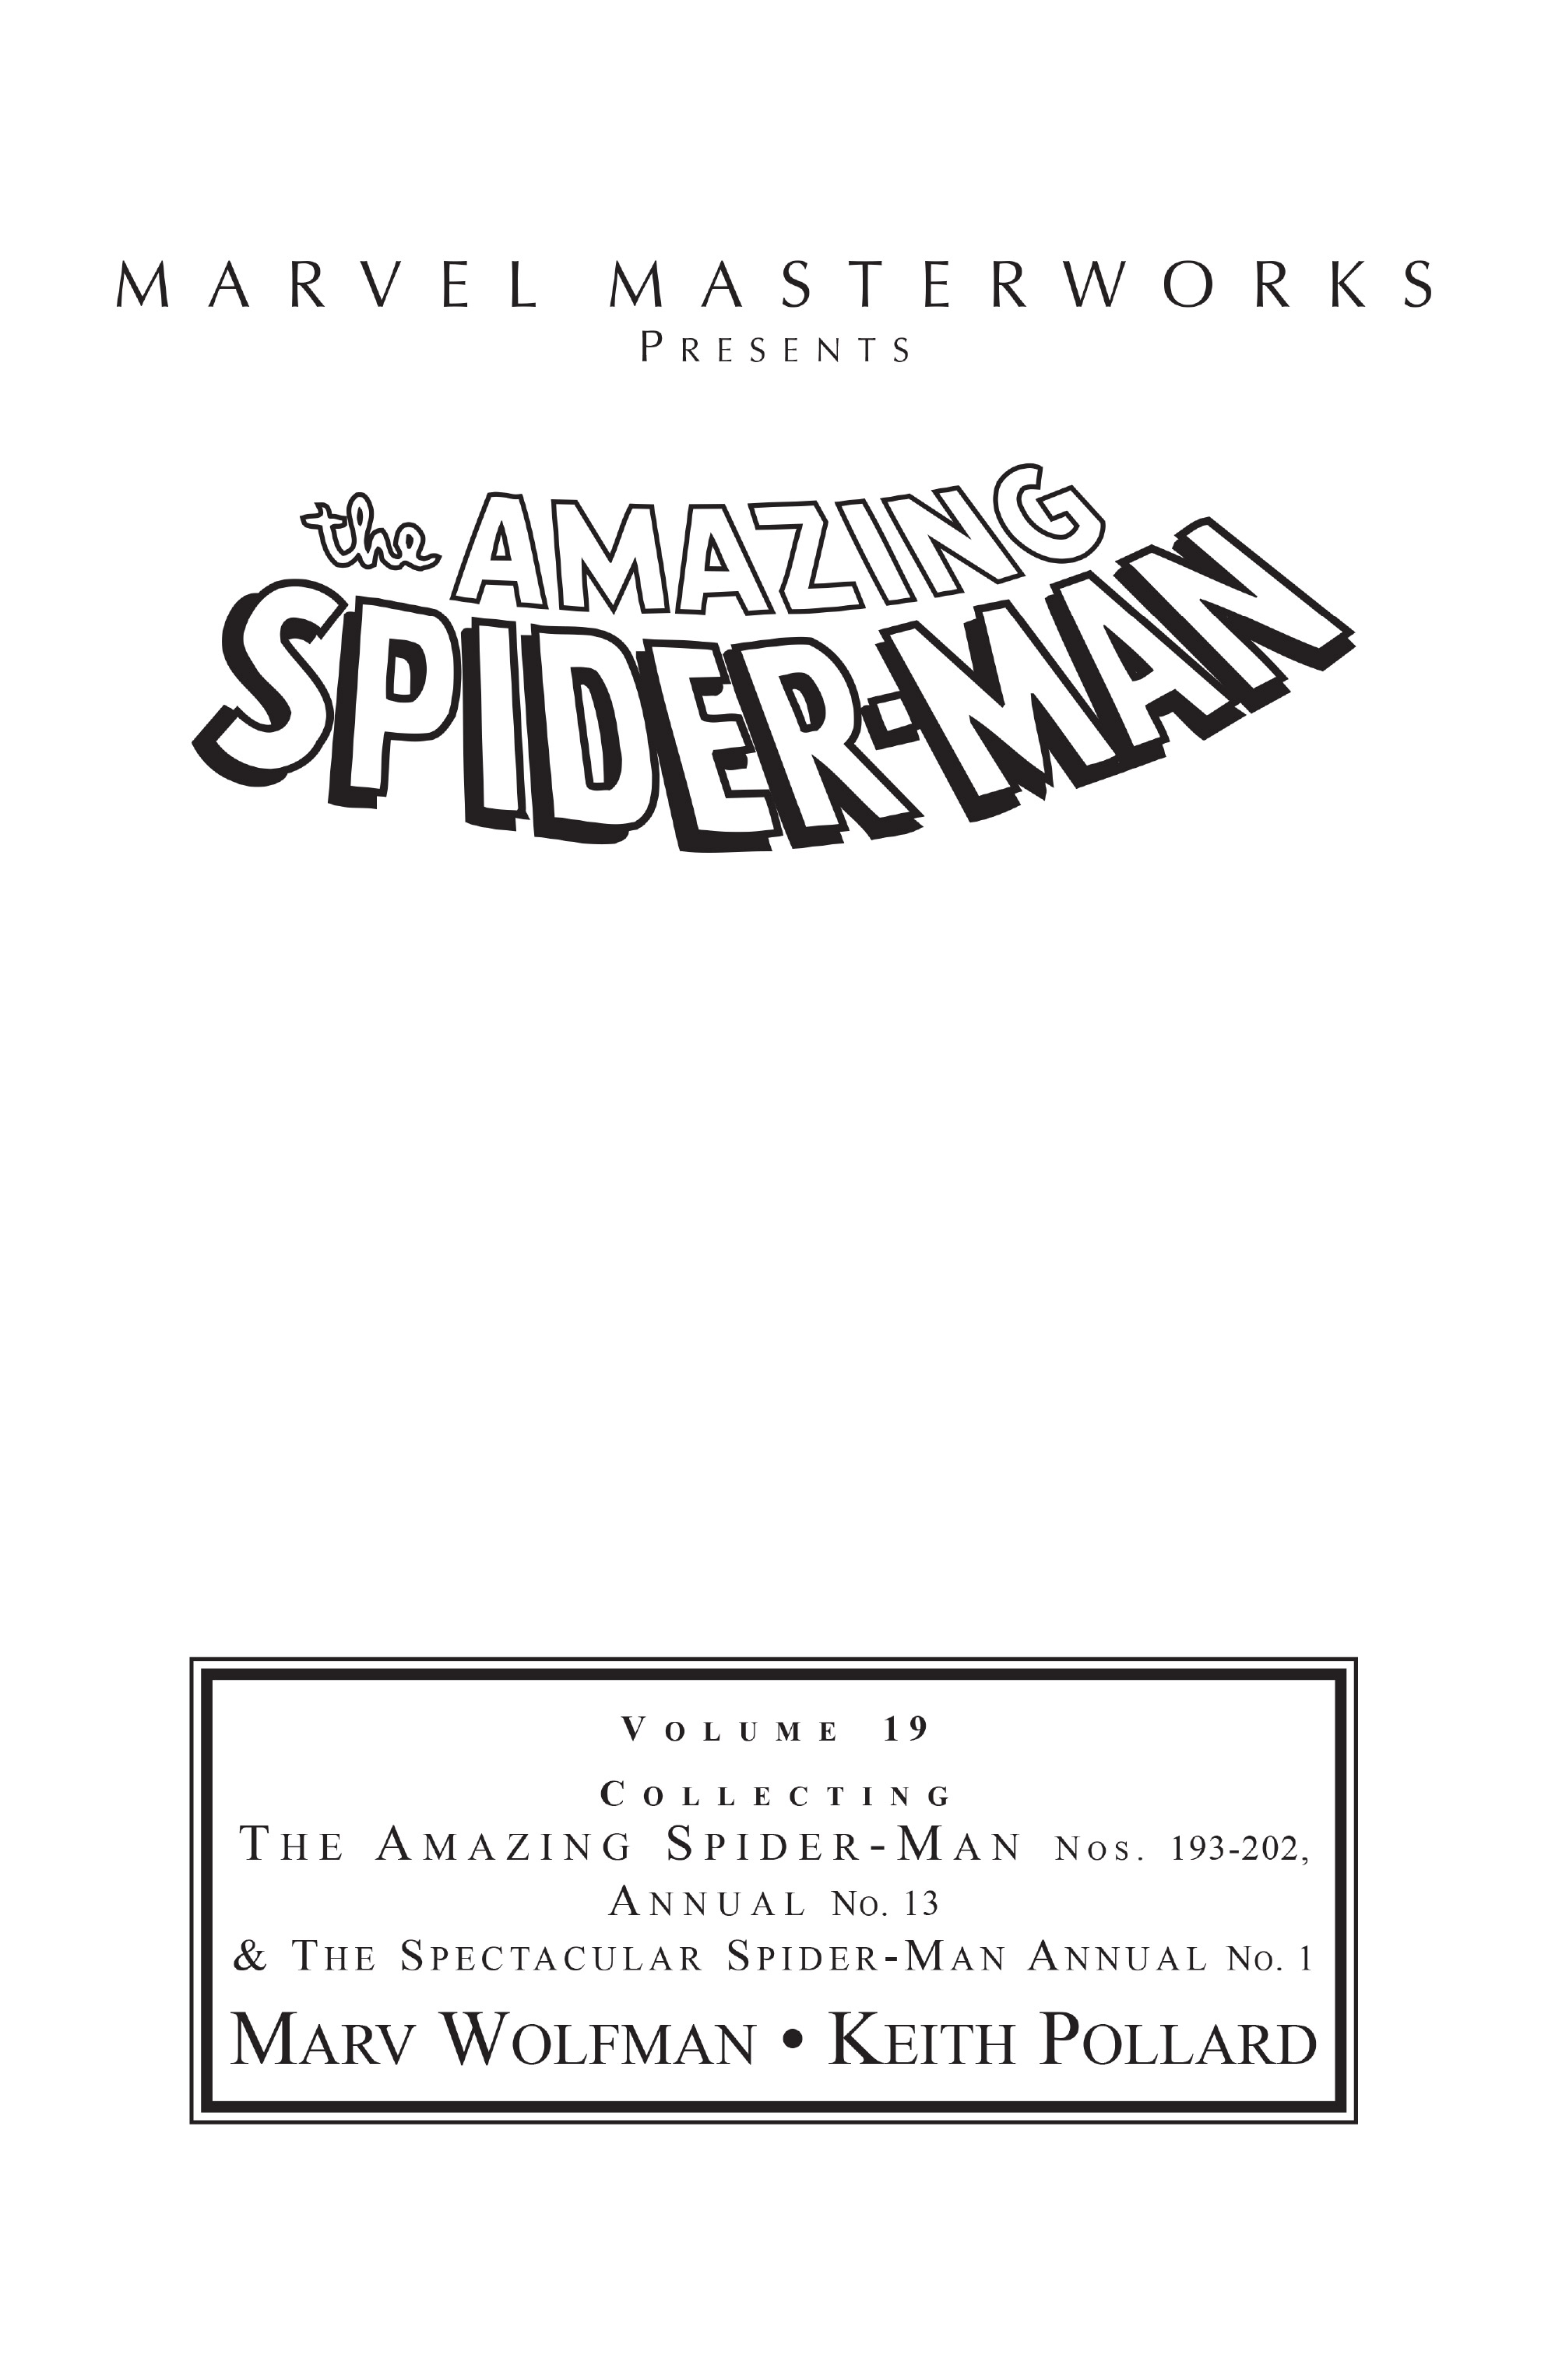 Read online Marvel Masterworks: The Amazing Spider-Man comic -  Issue # TPB 19 (Part 1) - 2